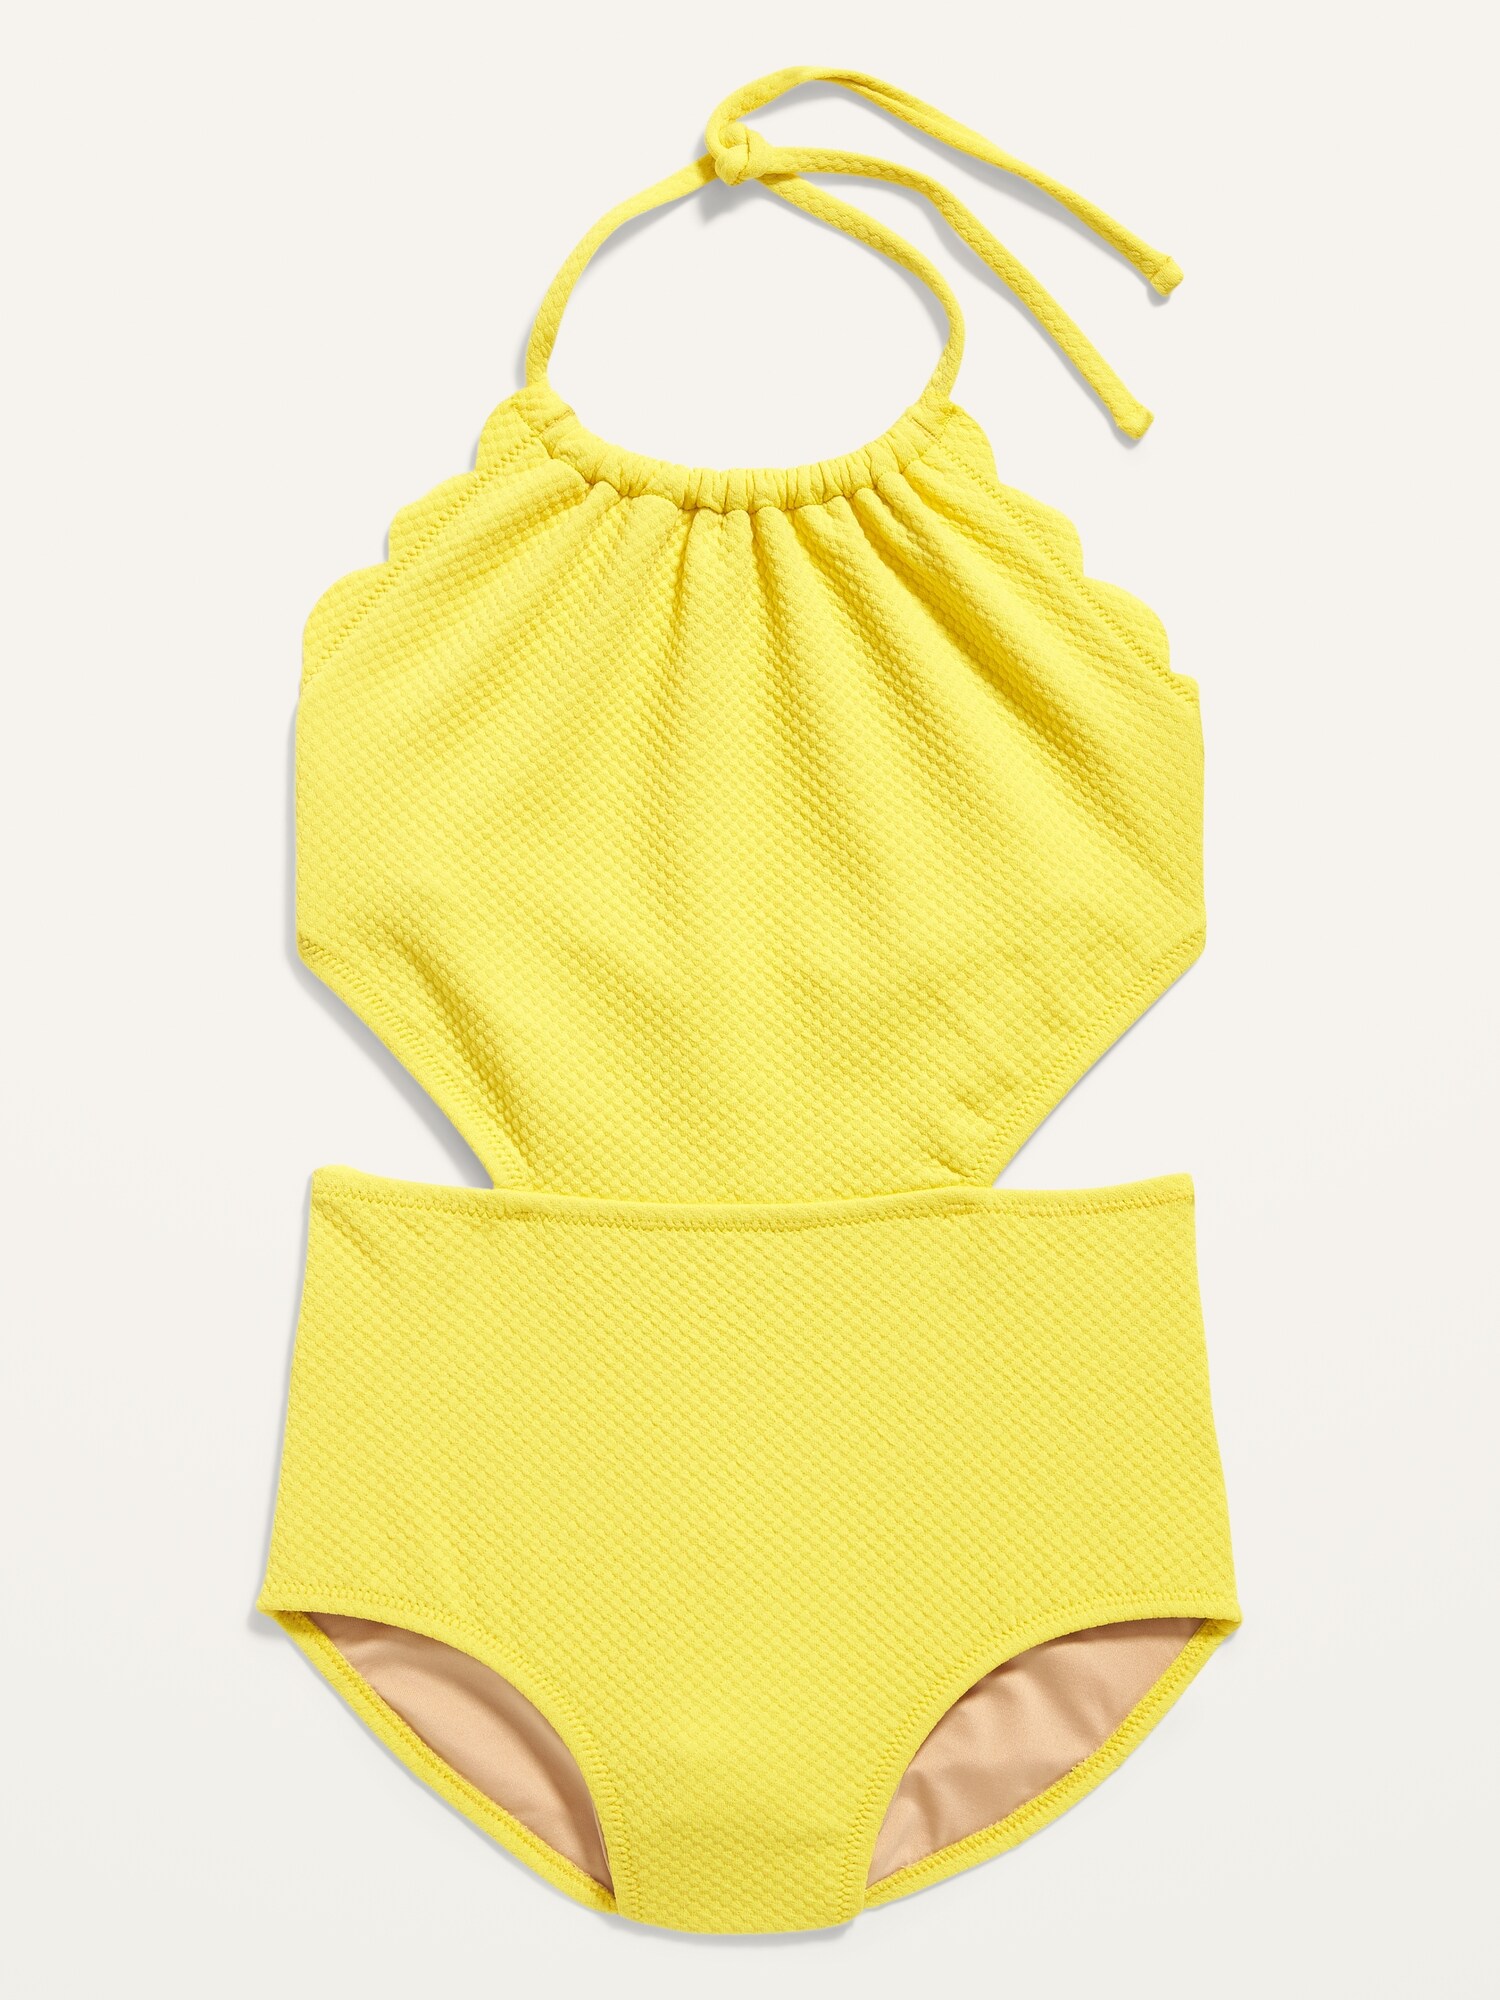 Textured Scallop-Edged Cutout Swimsuit for Girls